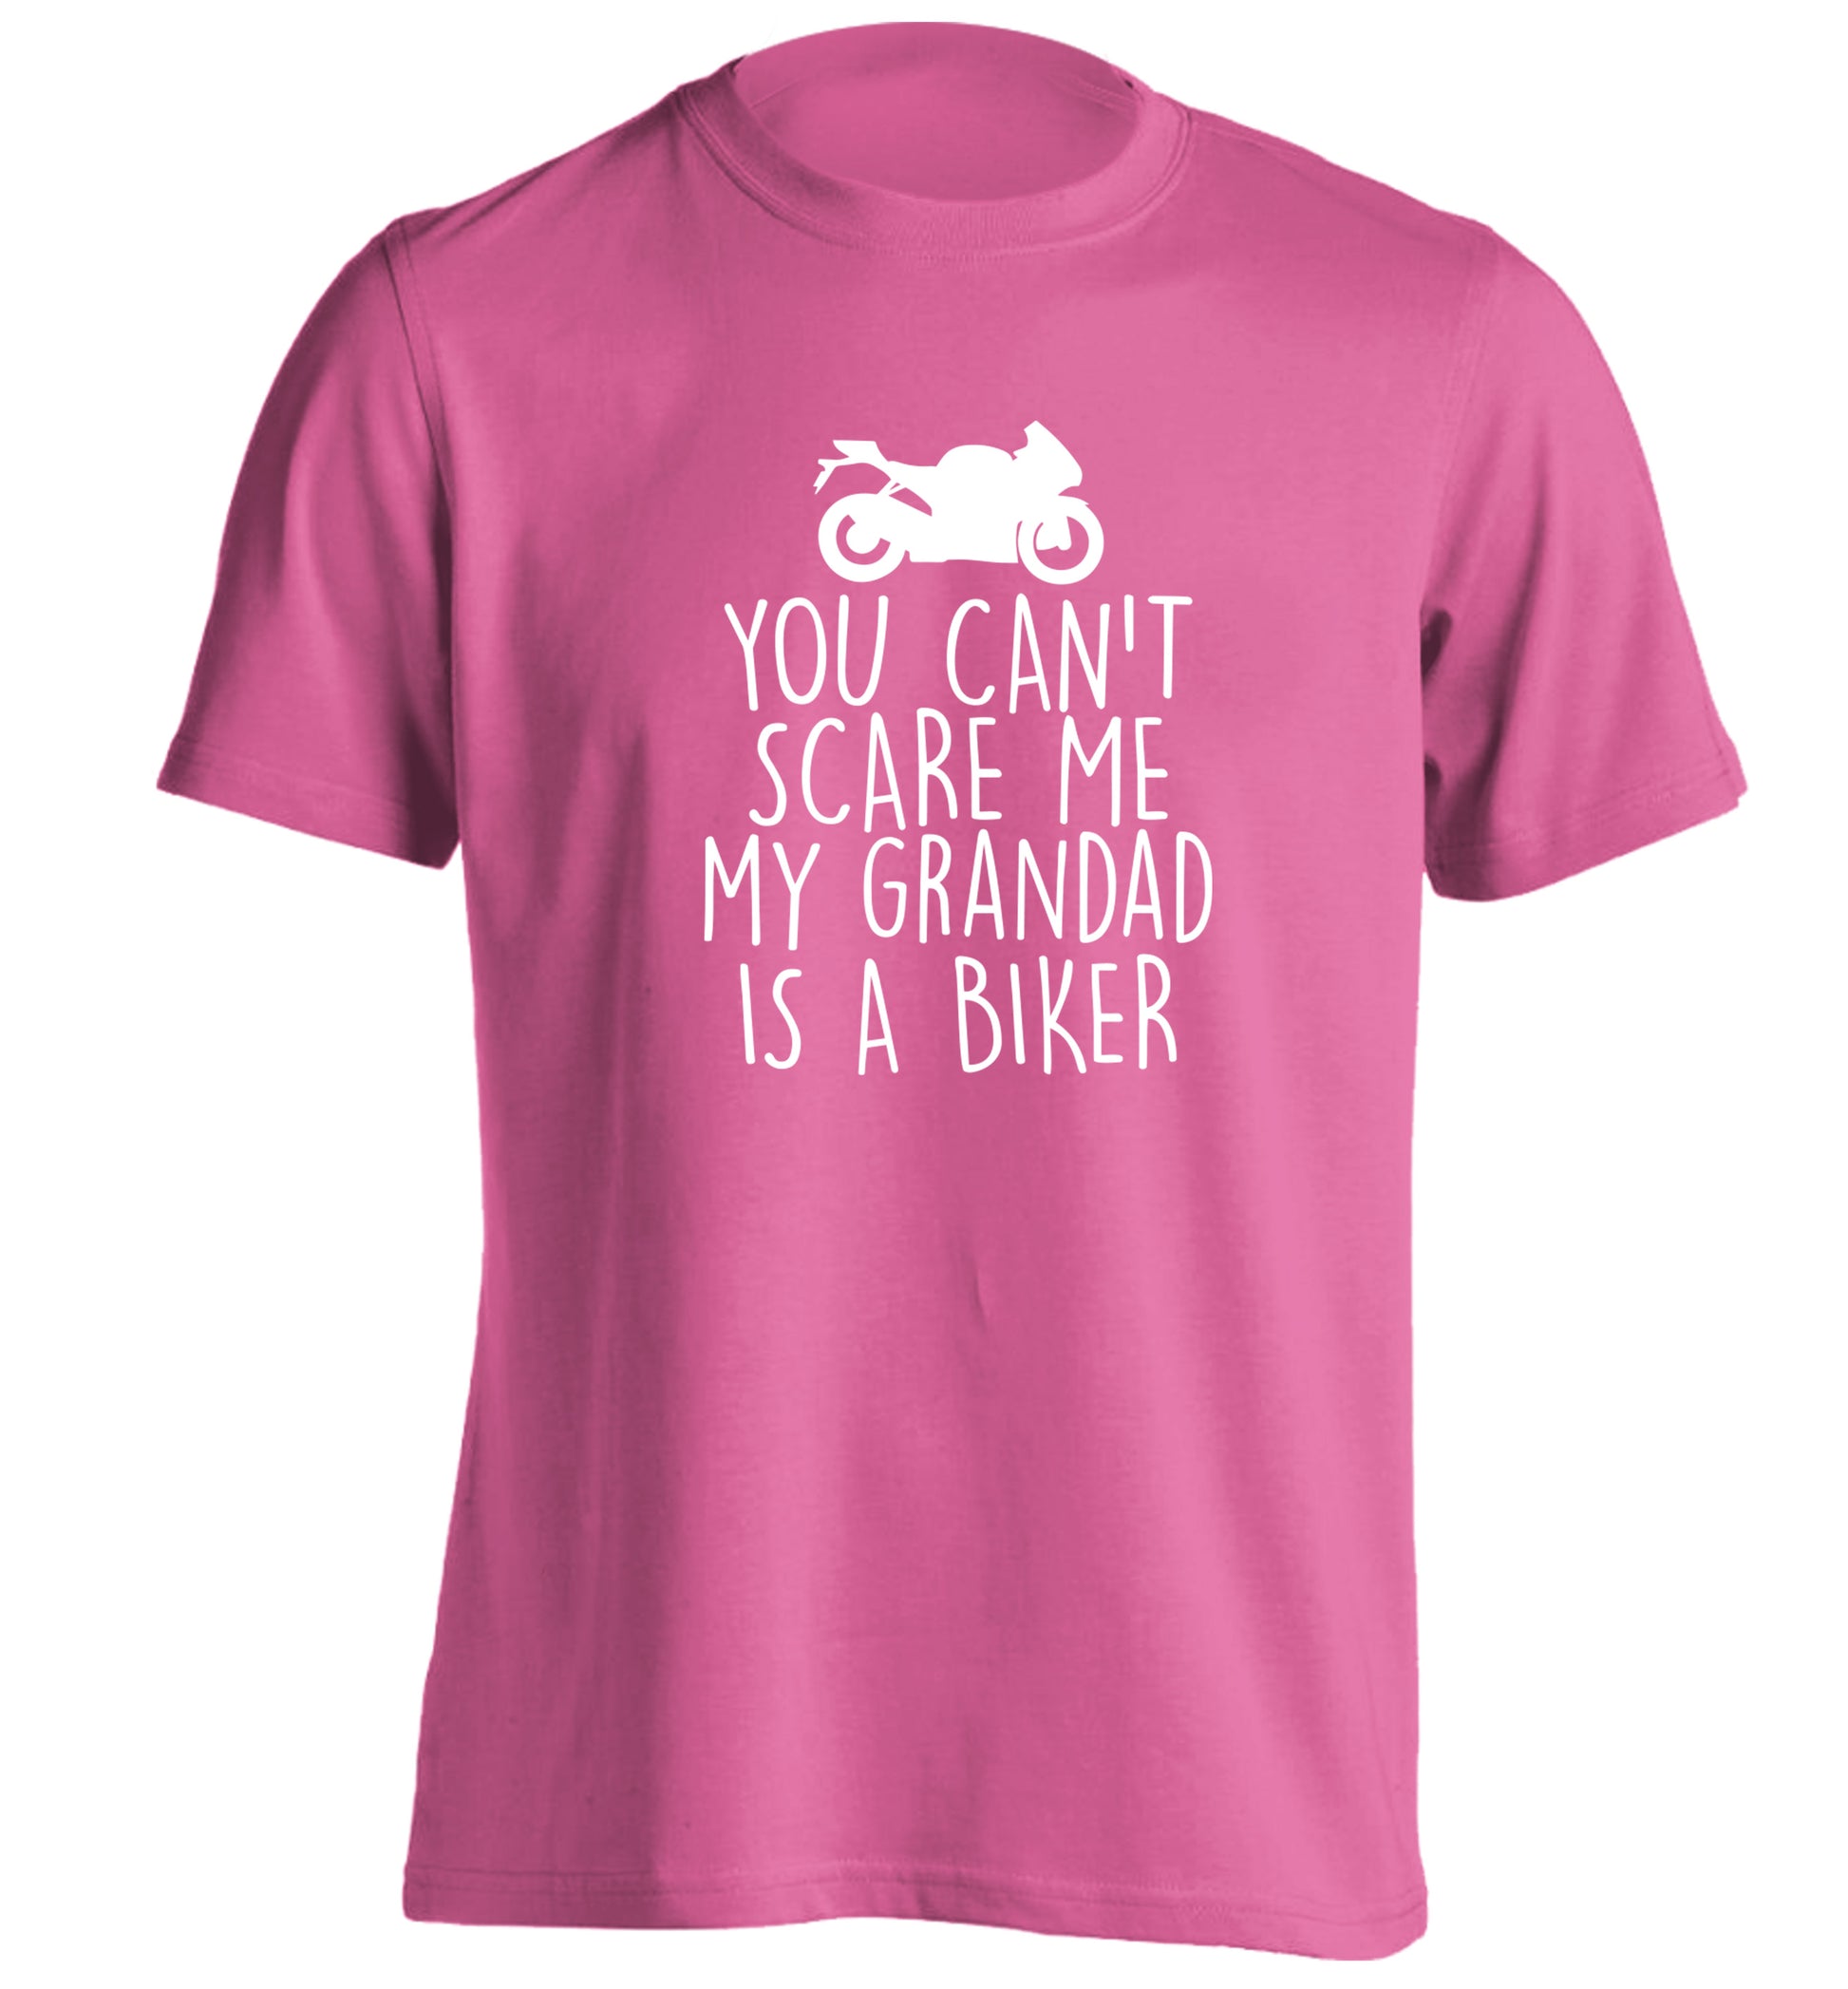 You can't scare me my grandad is a biker adults unisex pink Tshirt 2XL